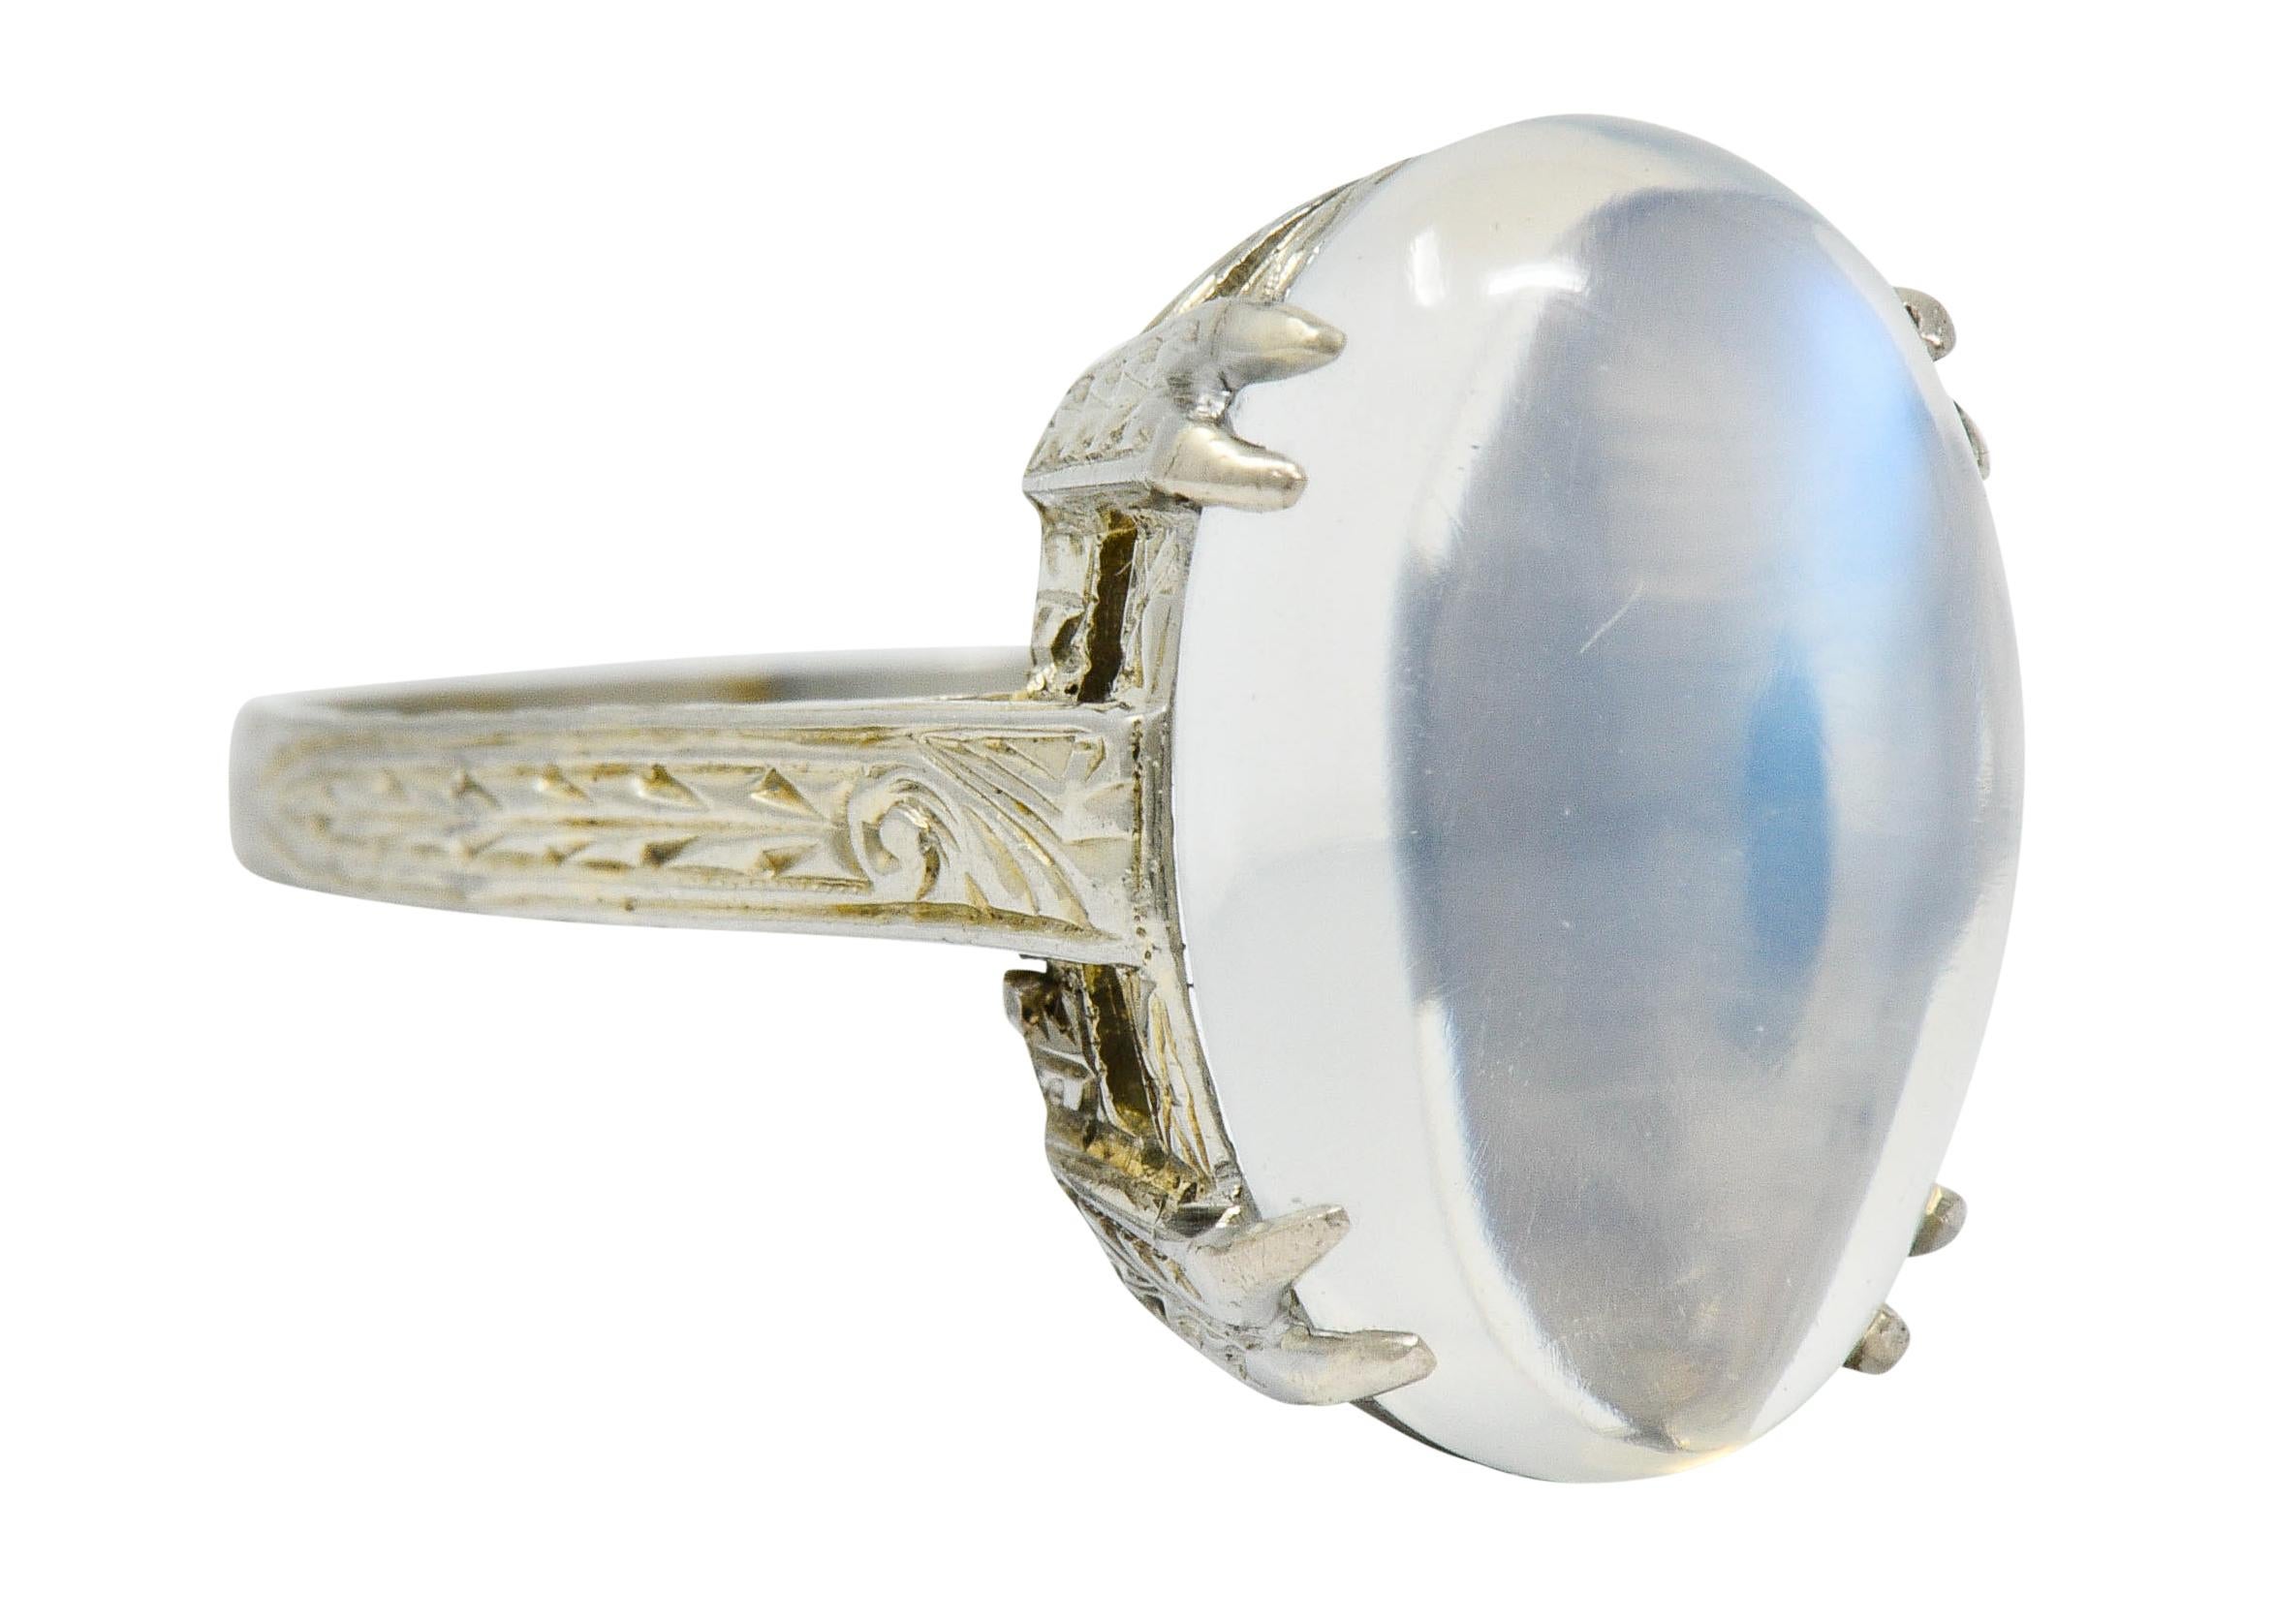 Centering an oval moonstone cabochon measuring approximately 15.5 x 10.4 mm

Translucent with moderately strong bluish-white adularescence

Basket set with stylized split prongs and emphasized by slight cathedral shoulders

Deeply hand engraved